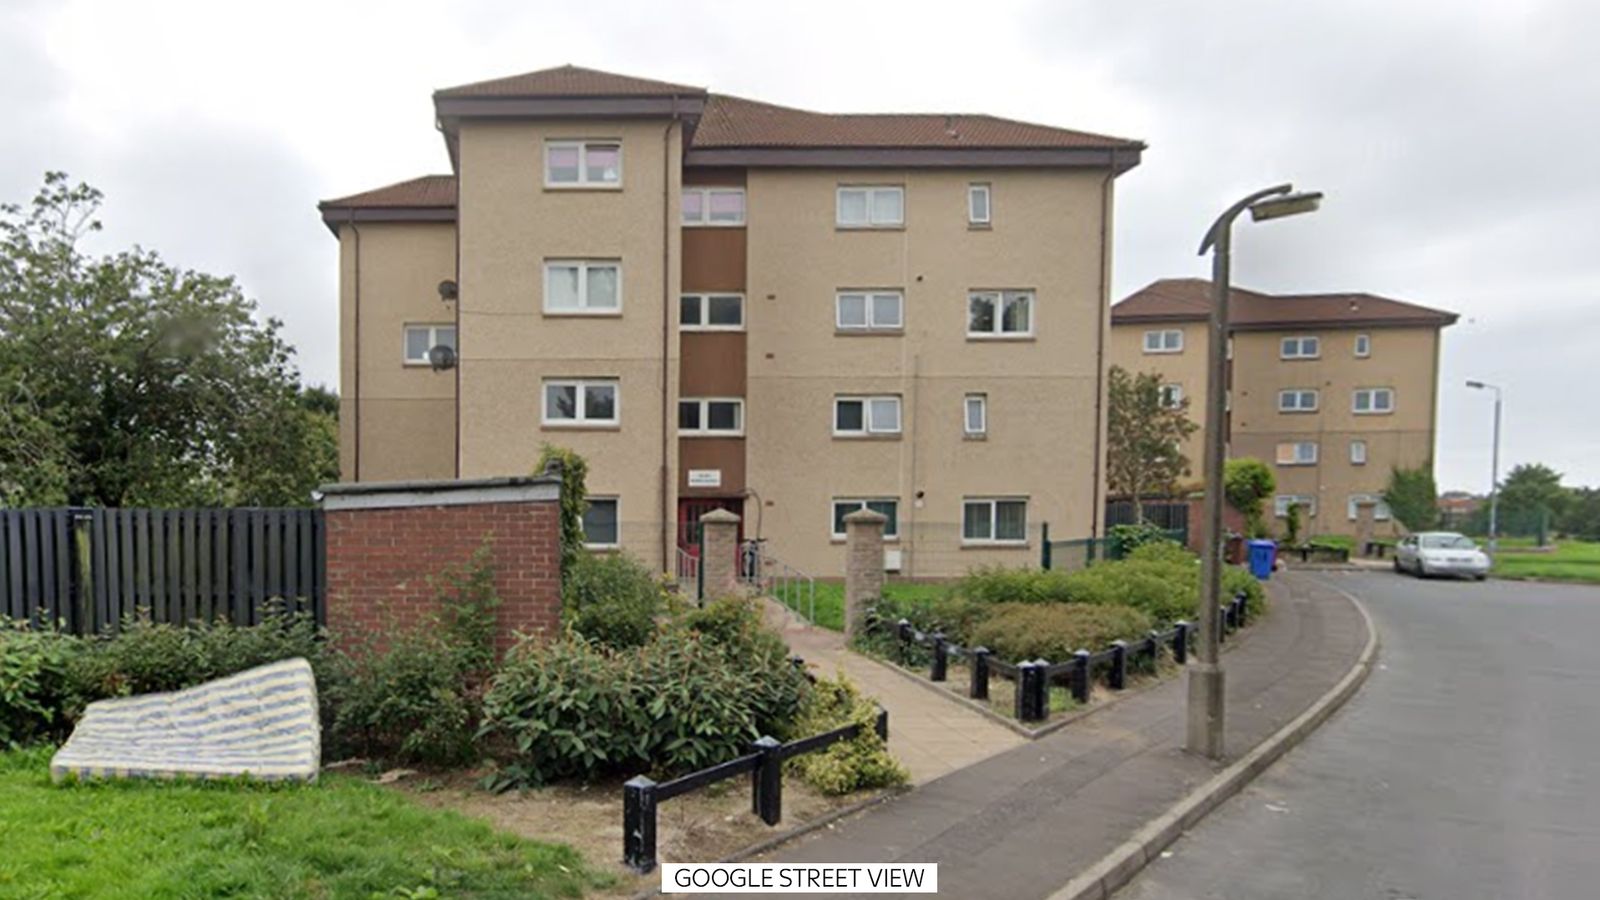 Woman dies in hospital after plunging from window at block of flats in Irvine.